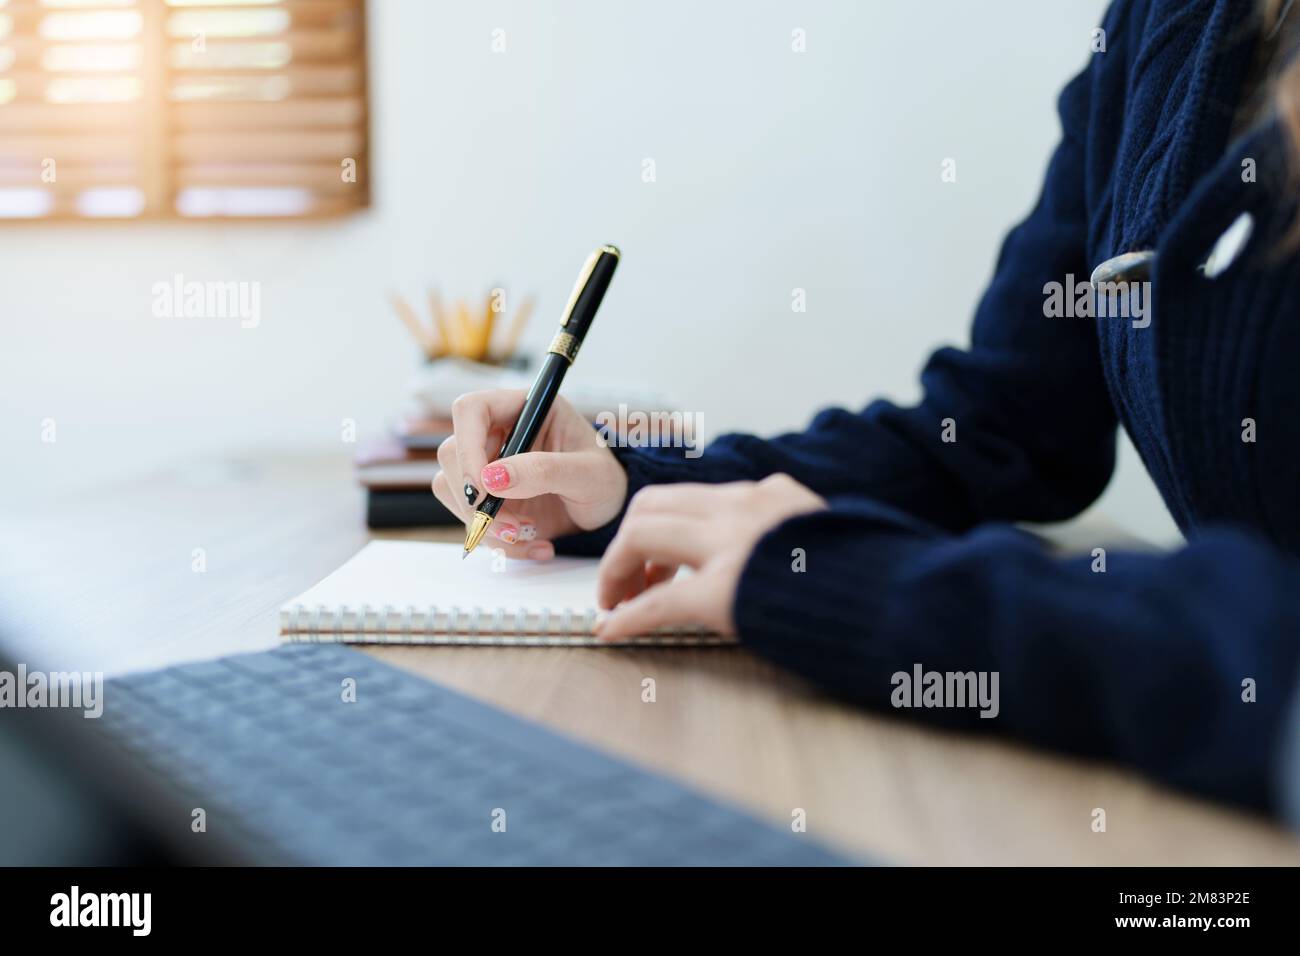 Portrait of a young Asian man showing a smiling face as she uses his notebook, tablet computer and financial documents on her desk in the early Stock Photo